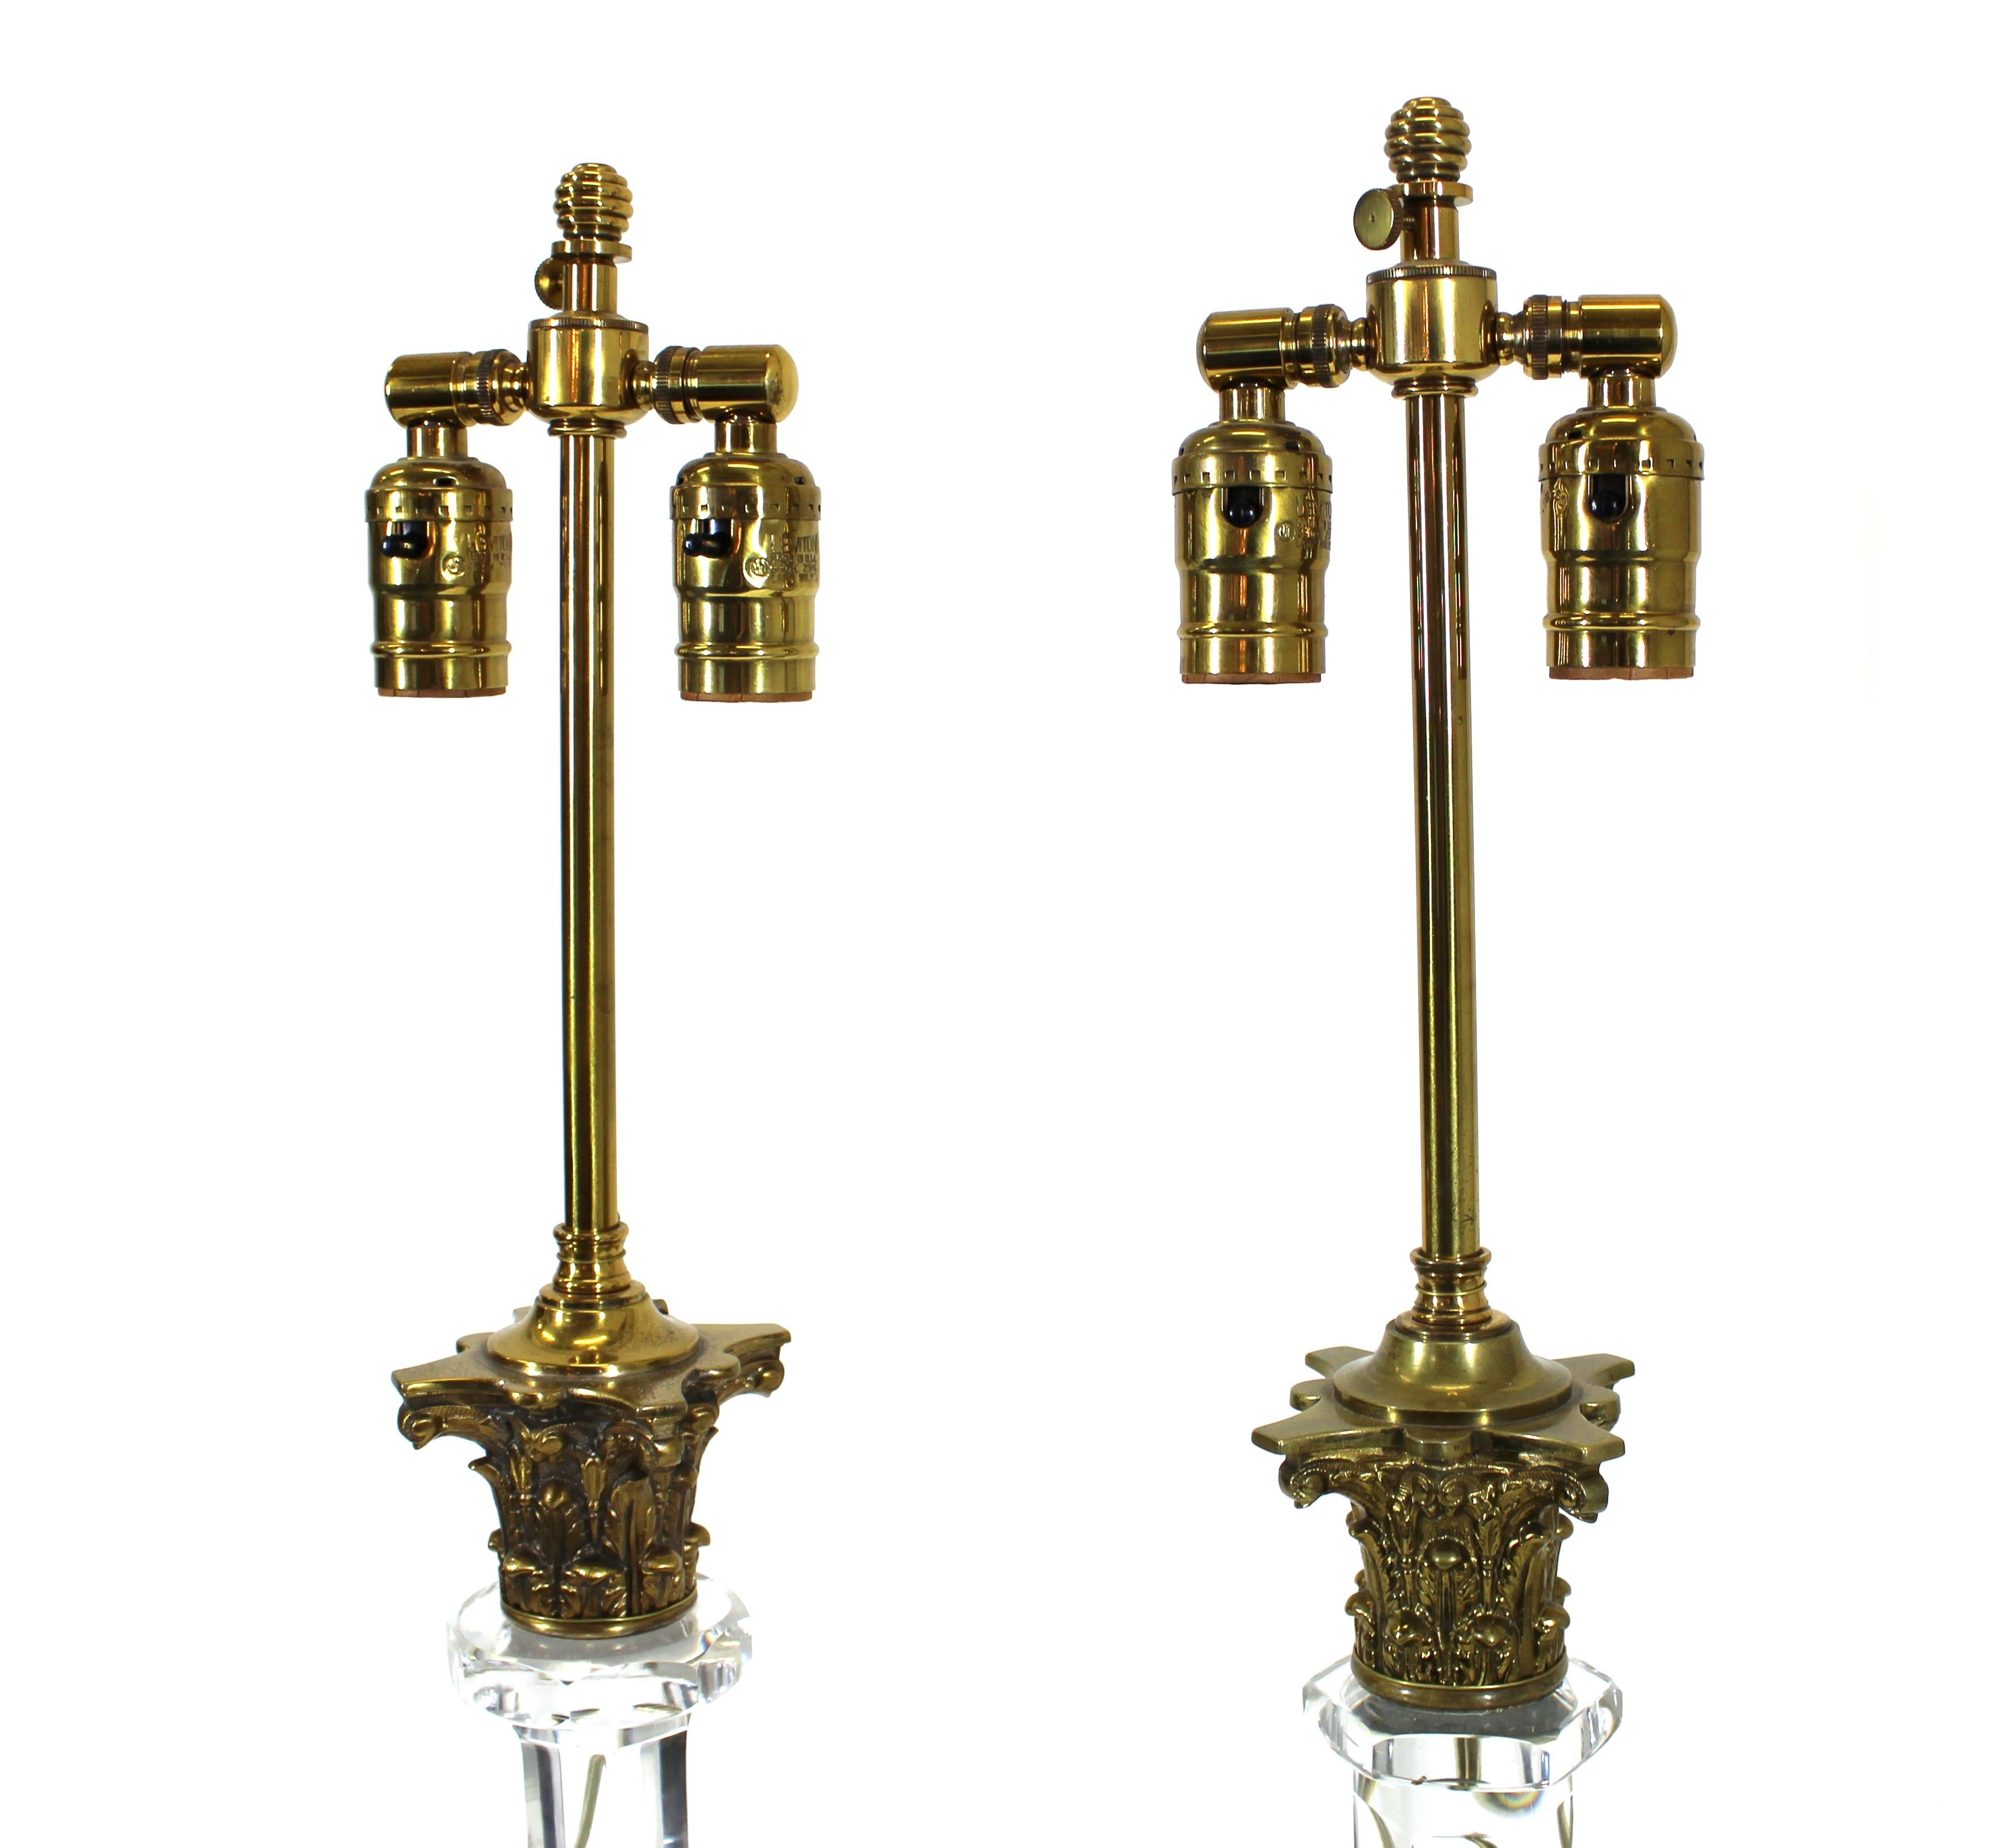 English Georgian pair of table lamps in heavy cut glass with bronze Corinthian capitals, late 19th century.